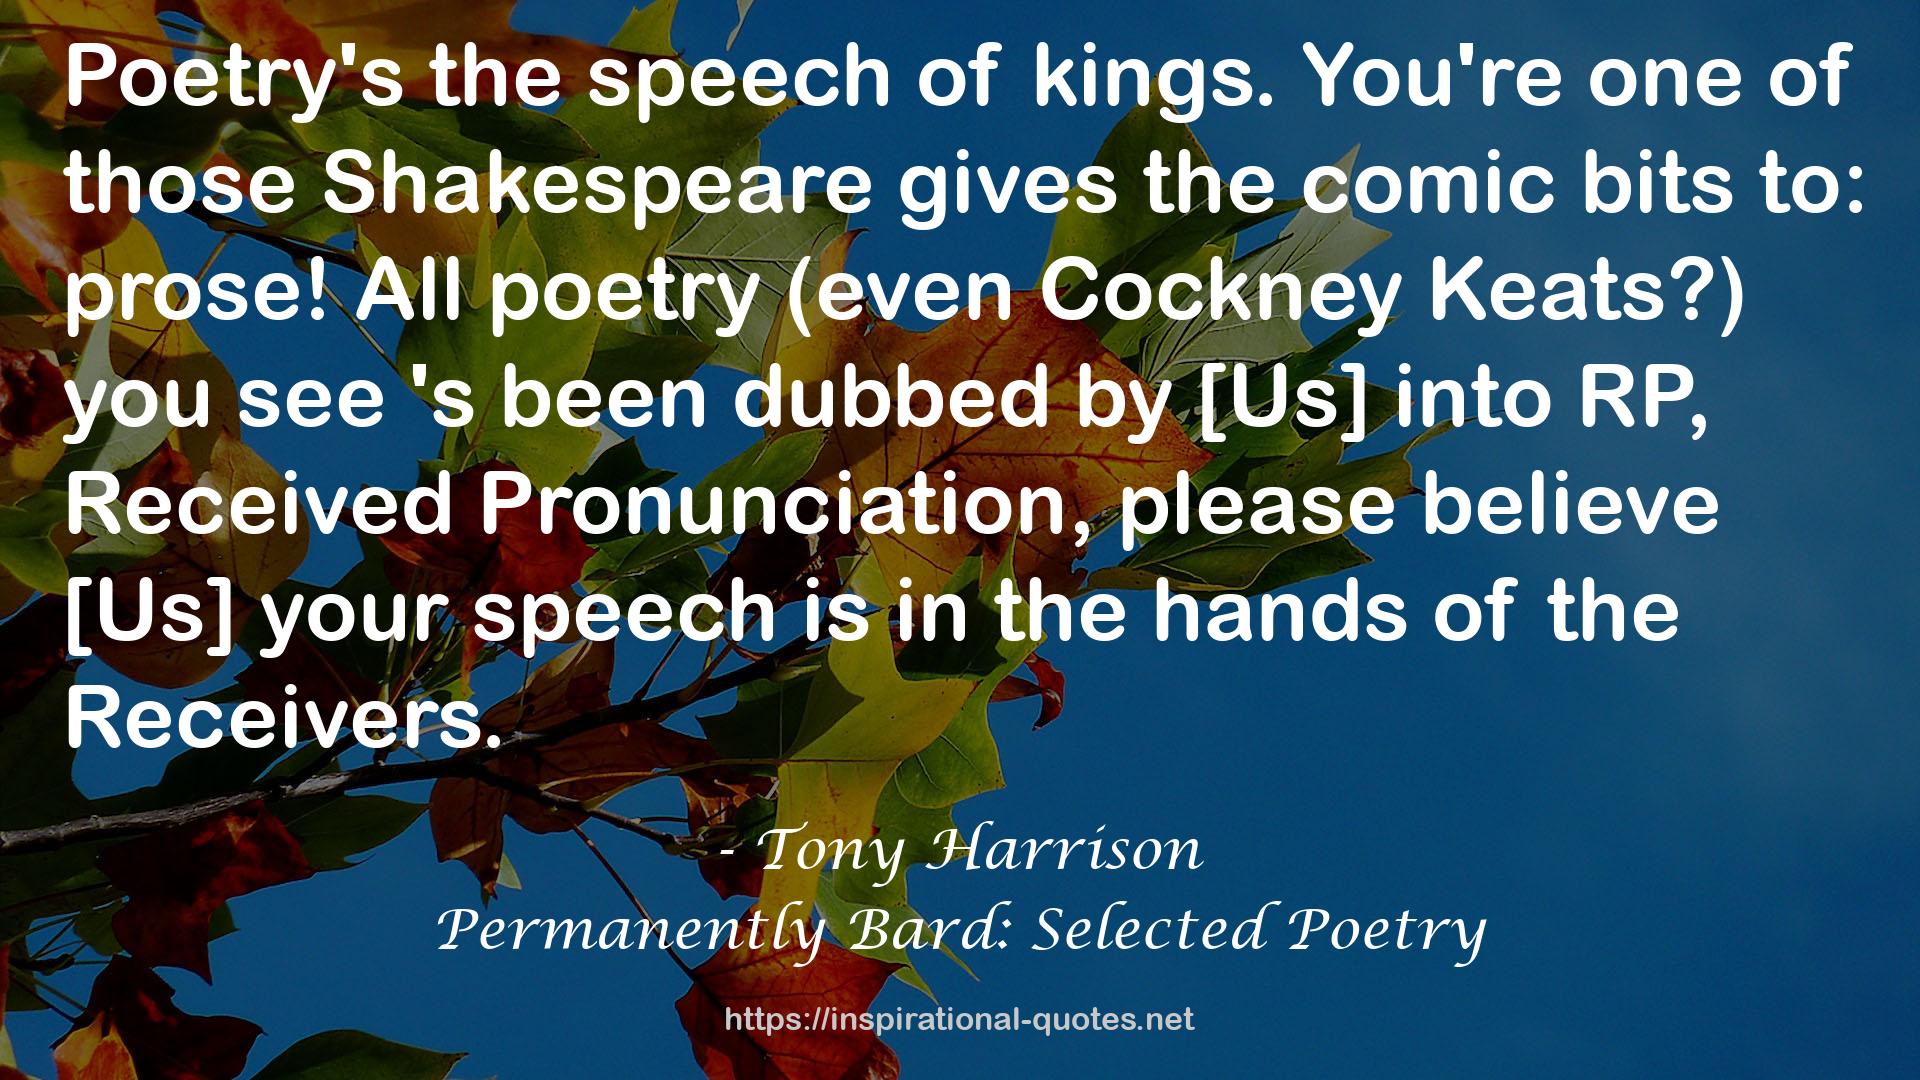 Permanently Bard: Selected Poetry QUOTES